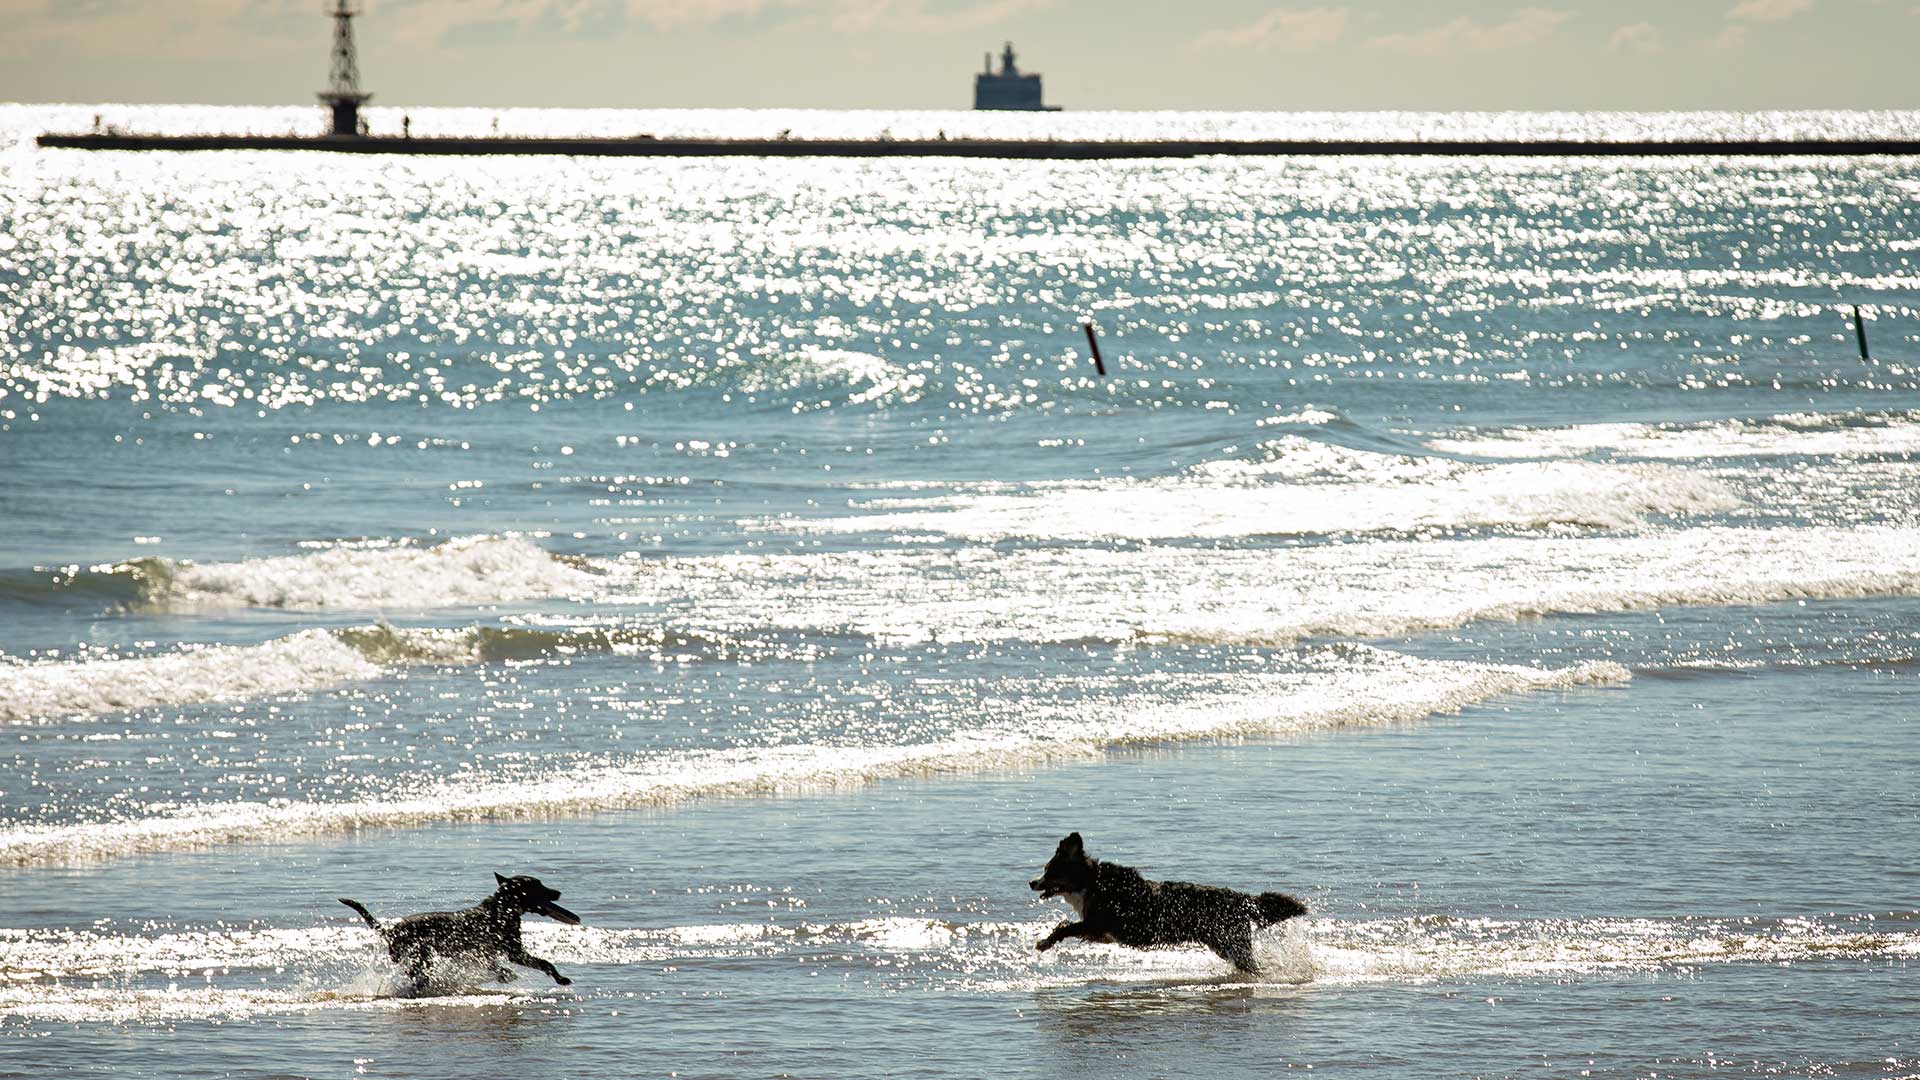 Two dogs play in the water at the beach.